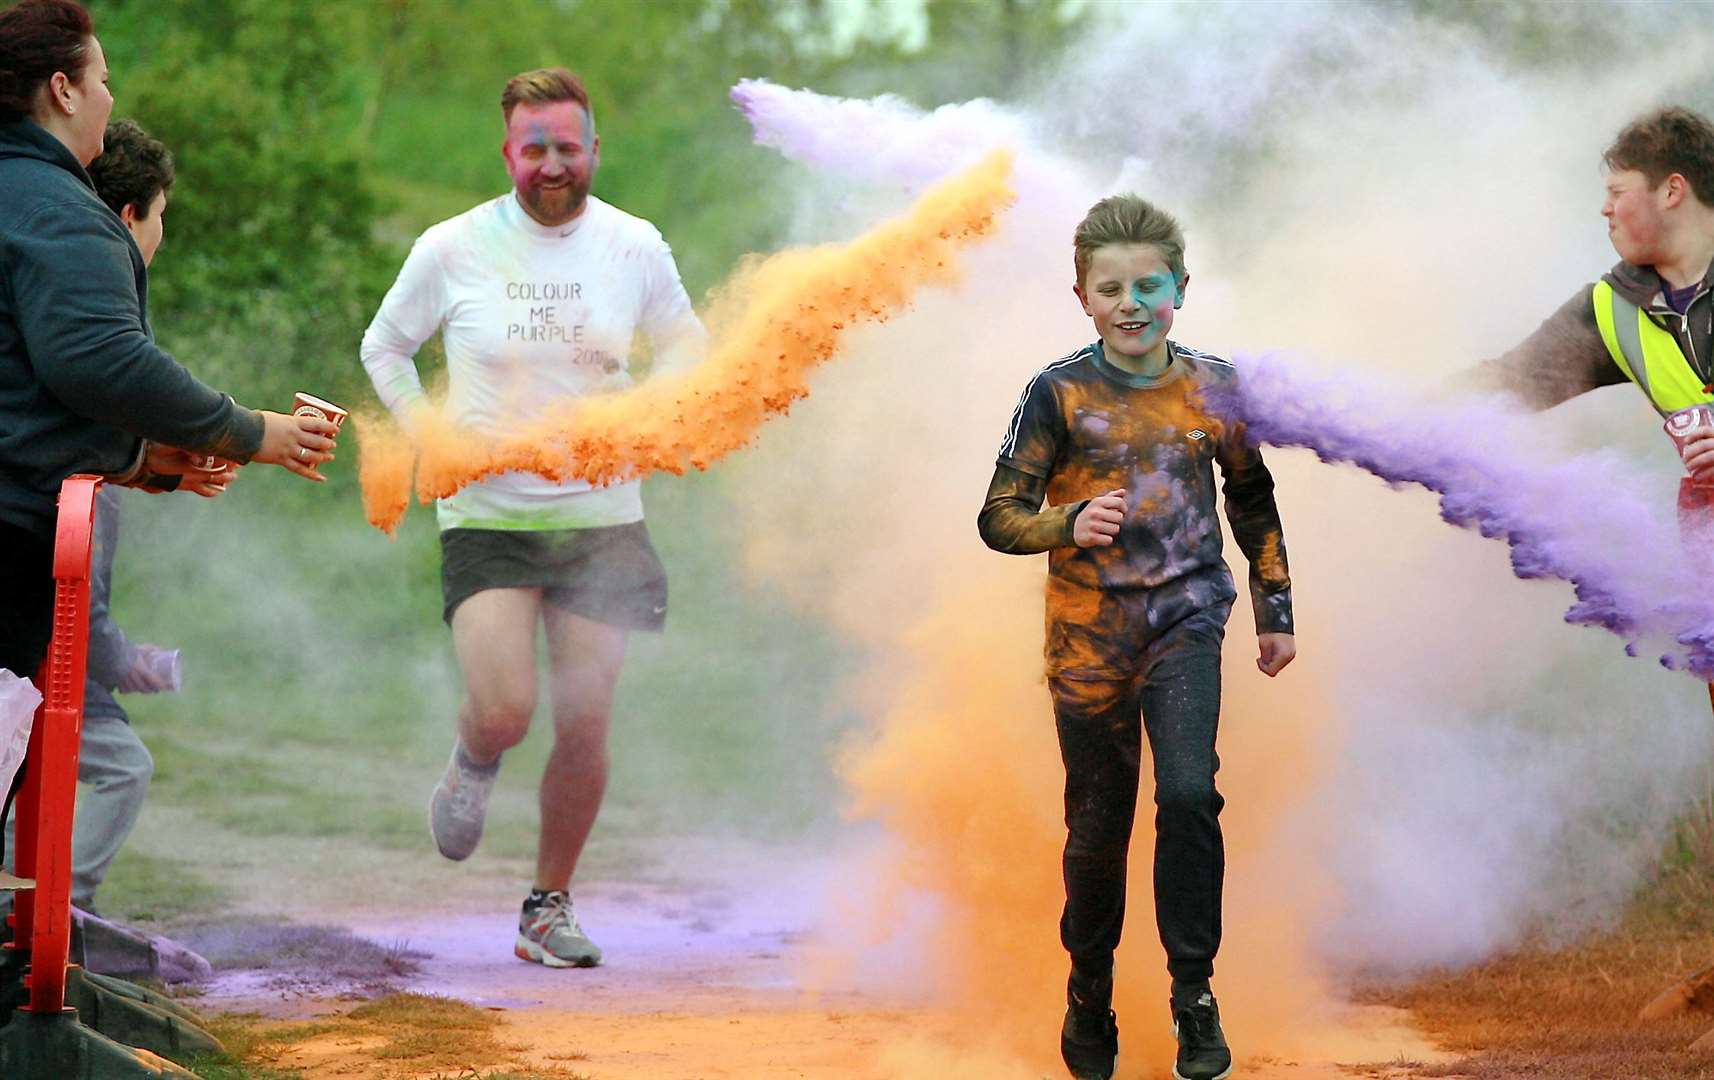 The Colour Me Purple run by the Wisdom Hospice will be at Milton Creek Country Park in Sittingbourne